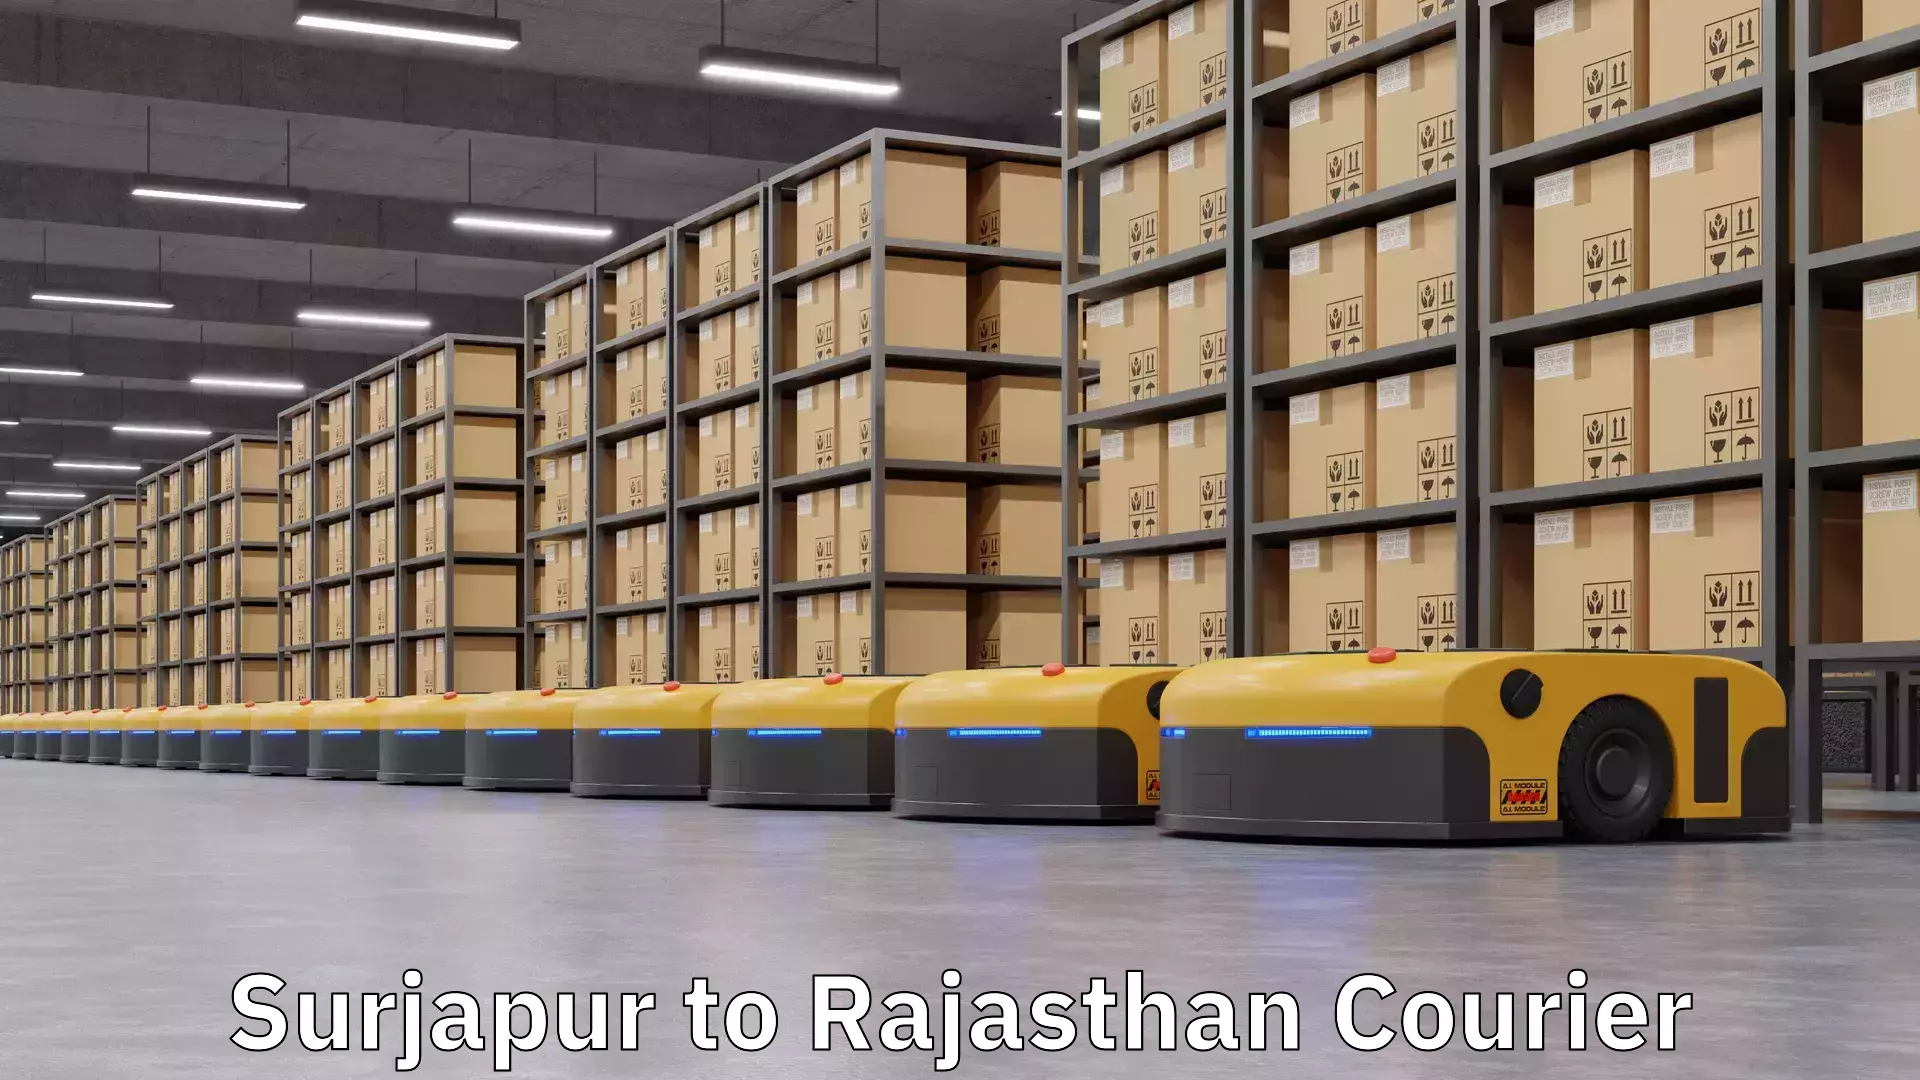 Courier service innovation Surjapur to Rajasthan